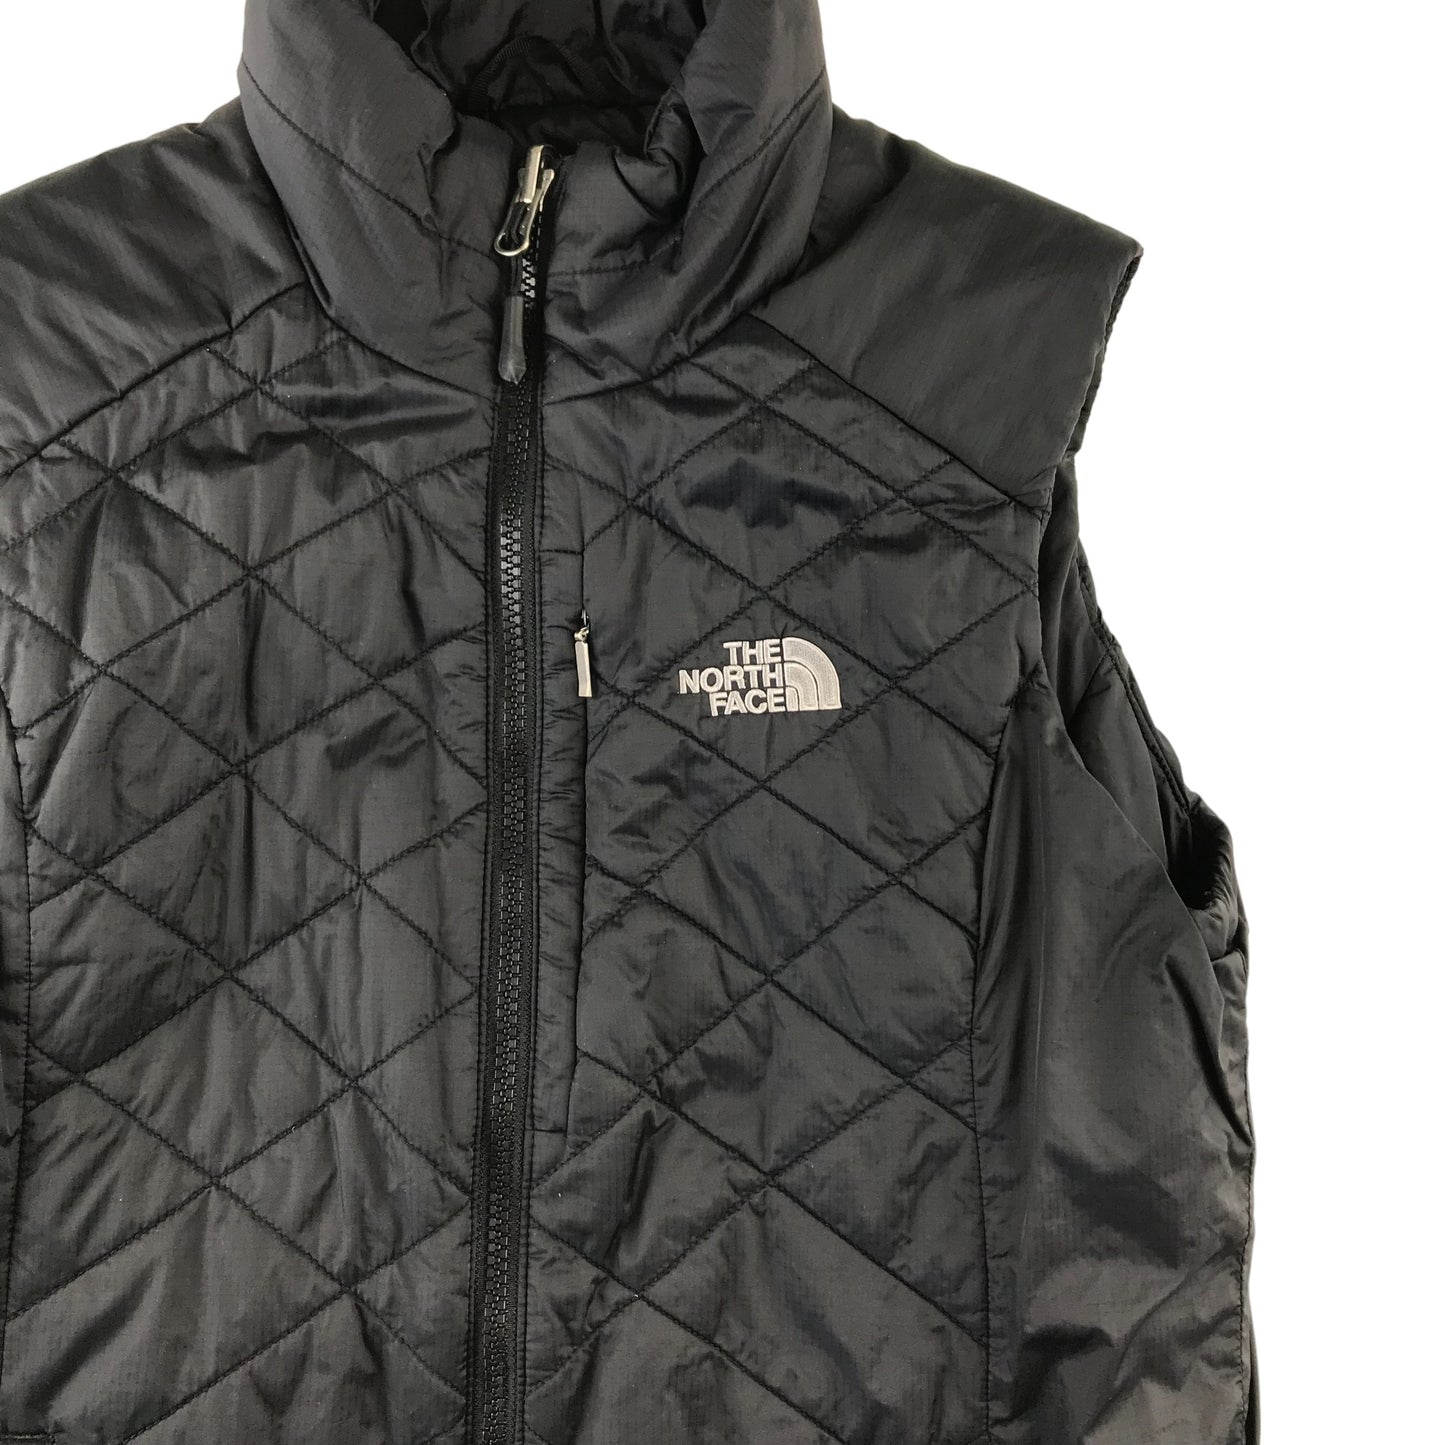 The North Face gilet size S women black light padded